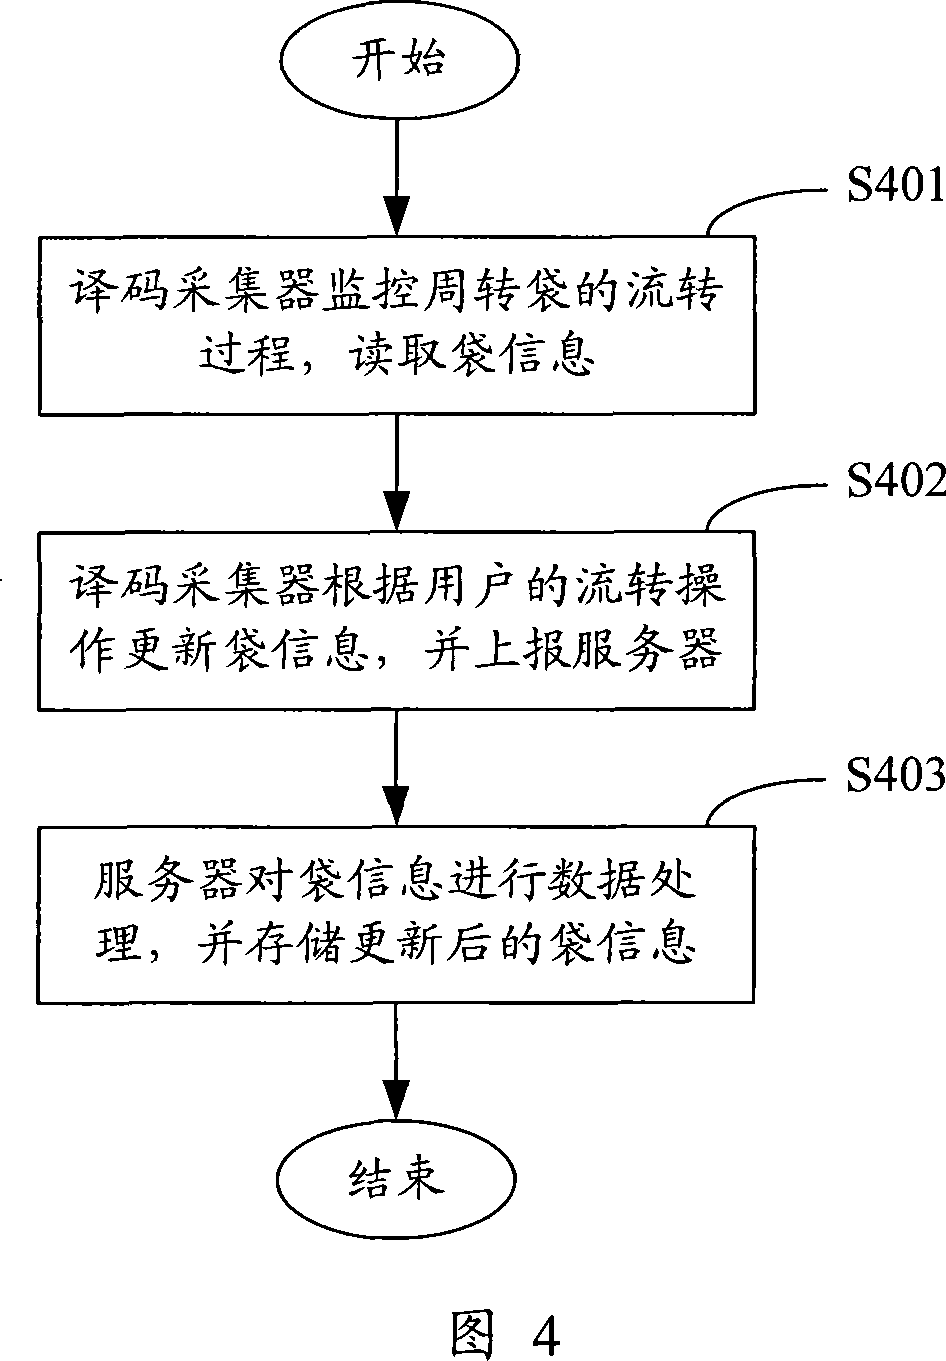 Method and system for controlling circulation of turnover bag